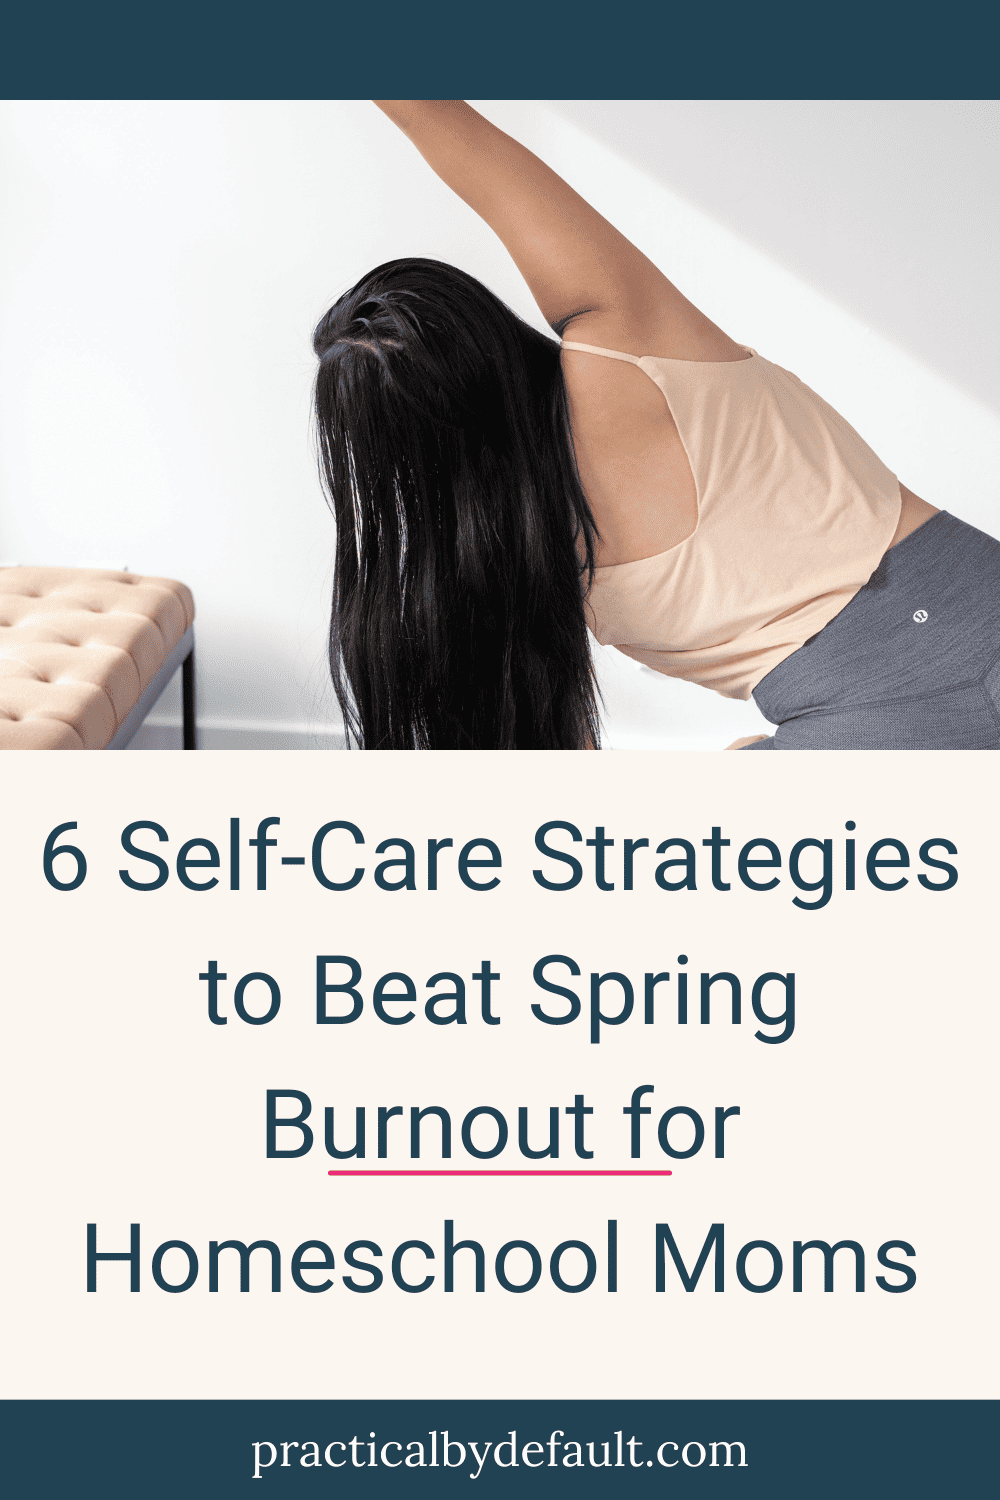 6 Self-Care Strategies to Beat Spring Burnout for Homeschool Moms